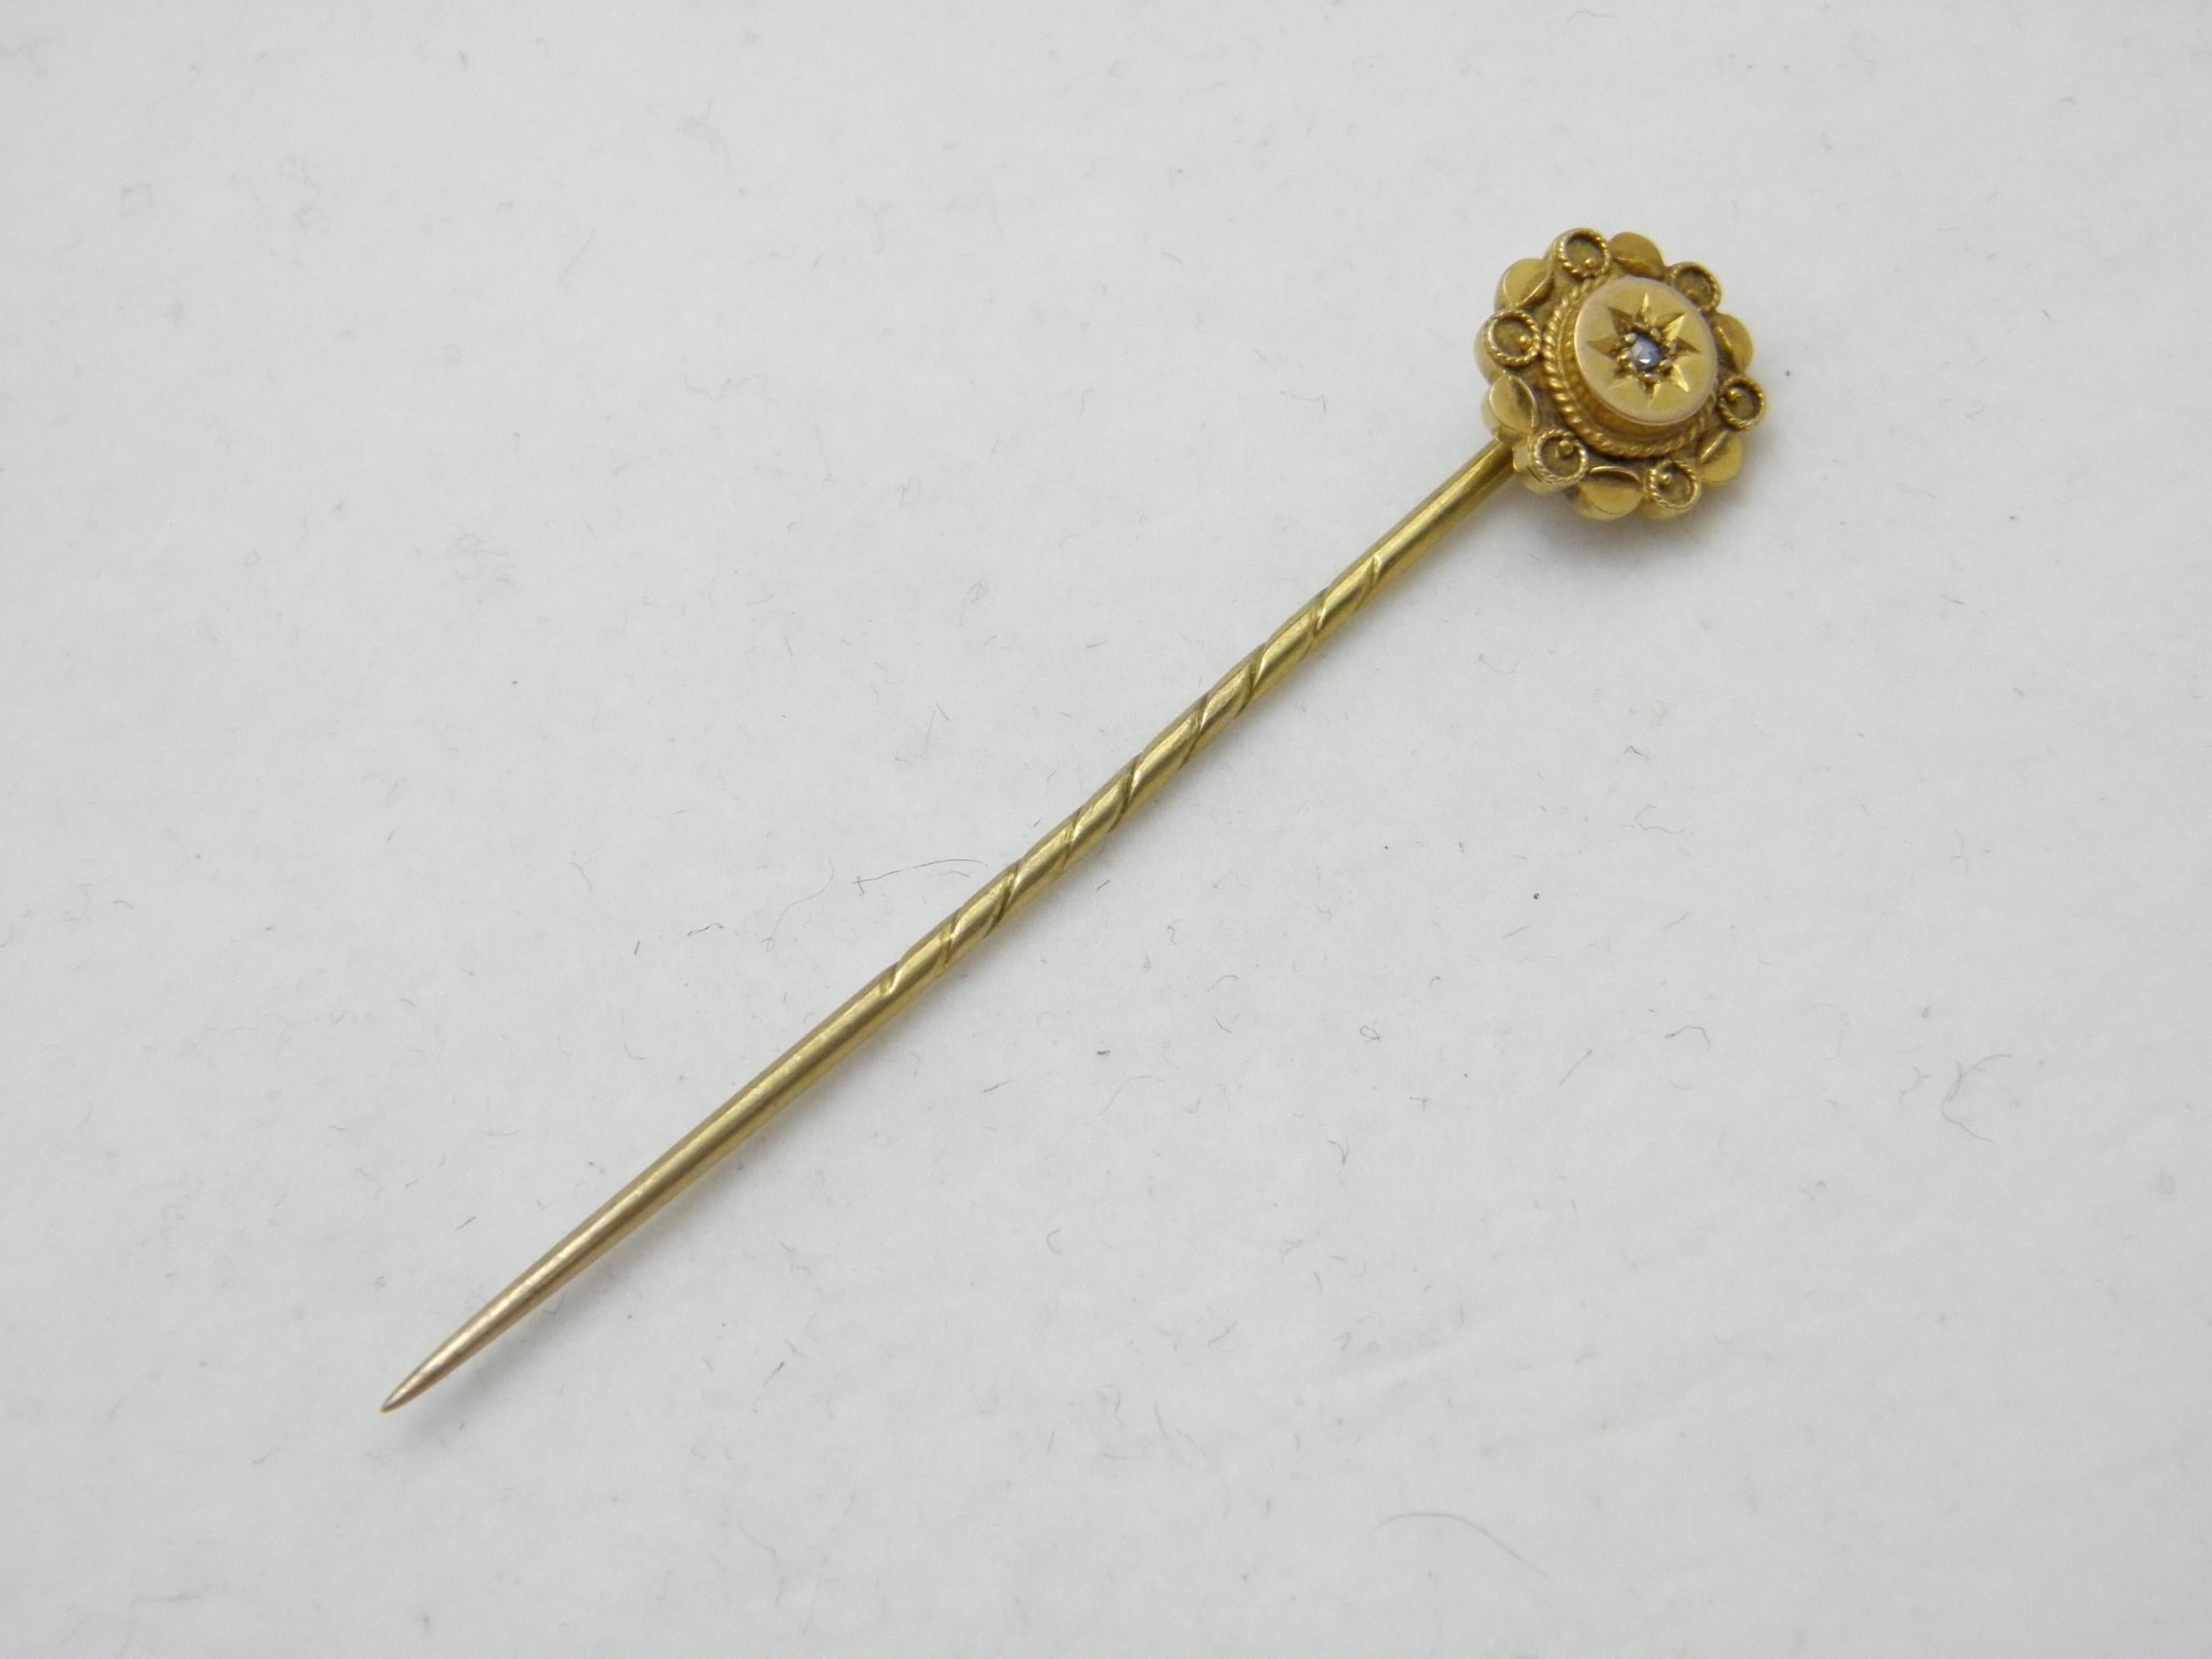 If you have landed on this page then you have an eye for beauty.

On offer is this gorgeous

15CT GOLD NATURAL DIAMOND STOCK PIN BROOCH

DETAILS
Material: 15ct (625/000) Solid Heavy Yellow Gold
Style: Victorian classic pin in the stock style with